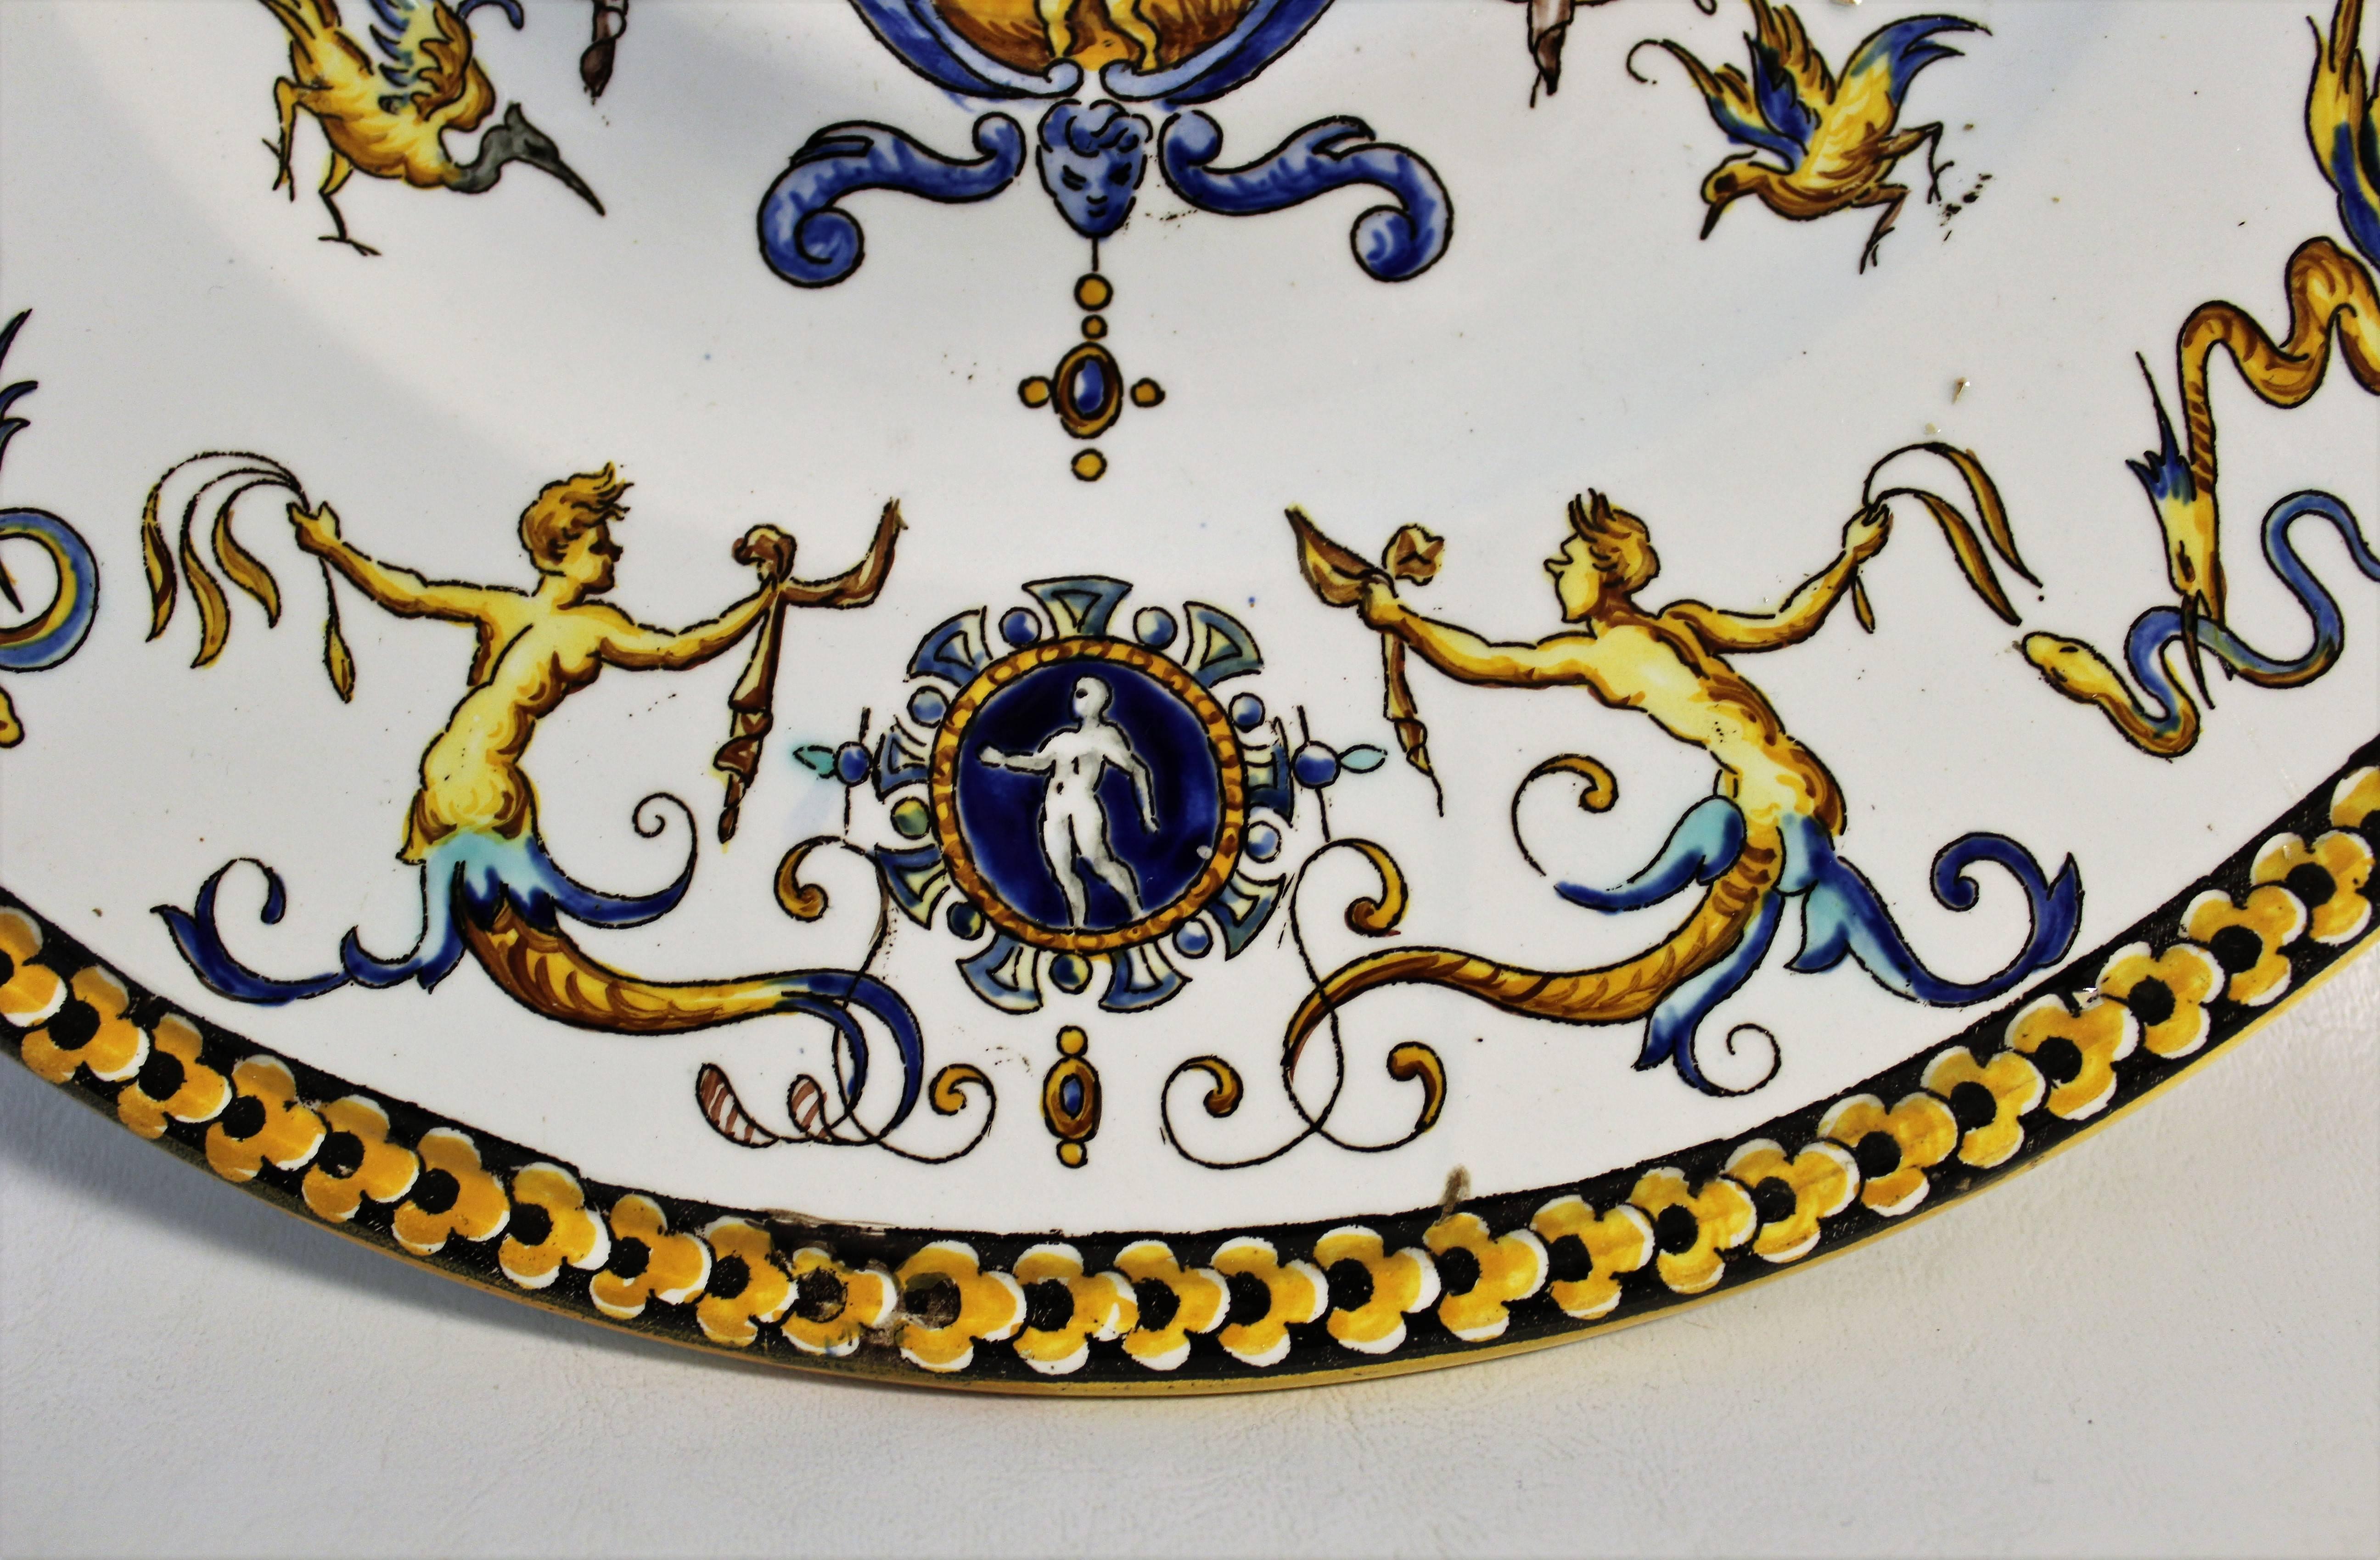 19th Century French Faience Charger or Plate In Good Condition For Sale In Hamilton, Ontario